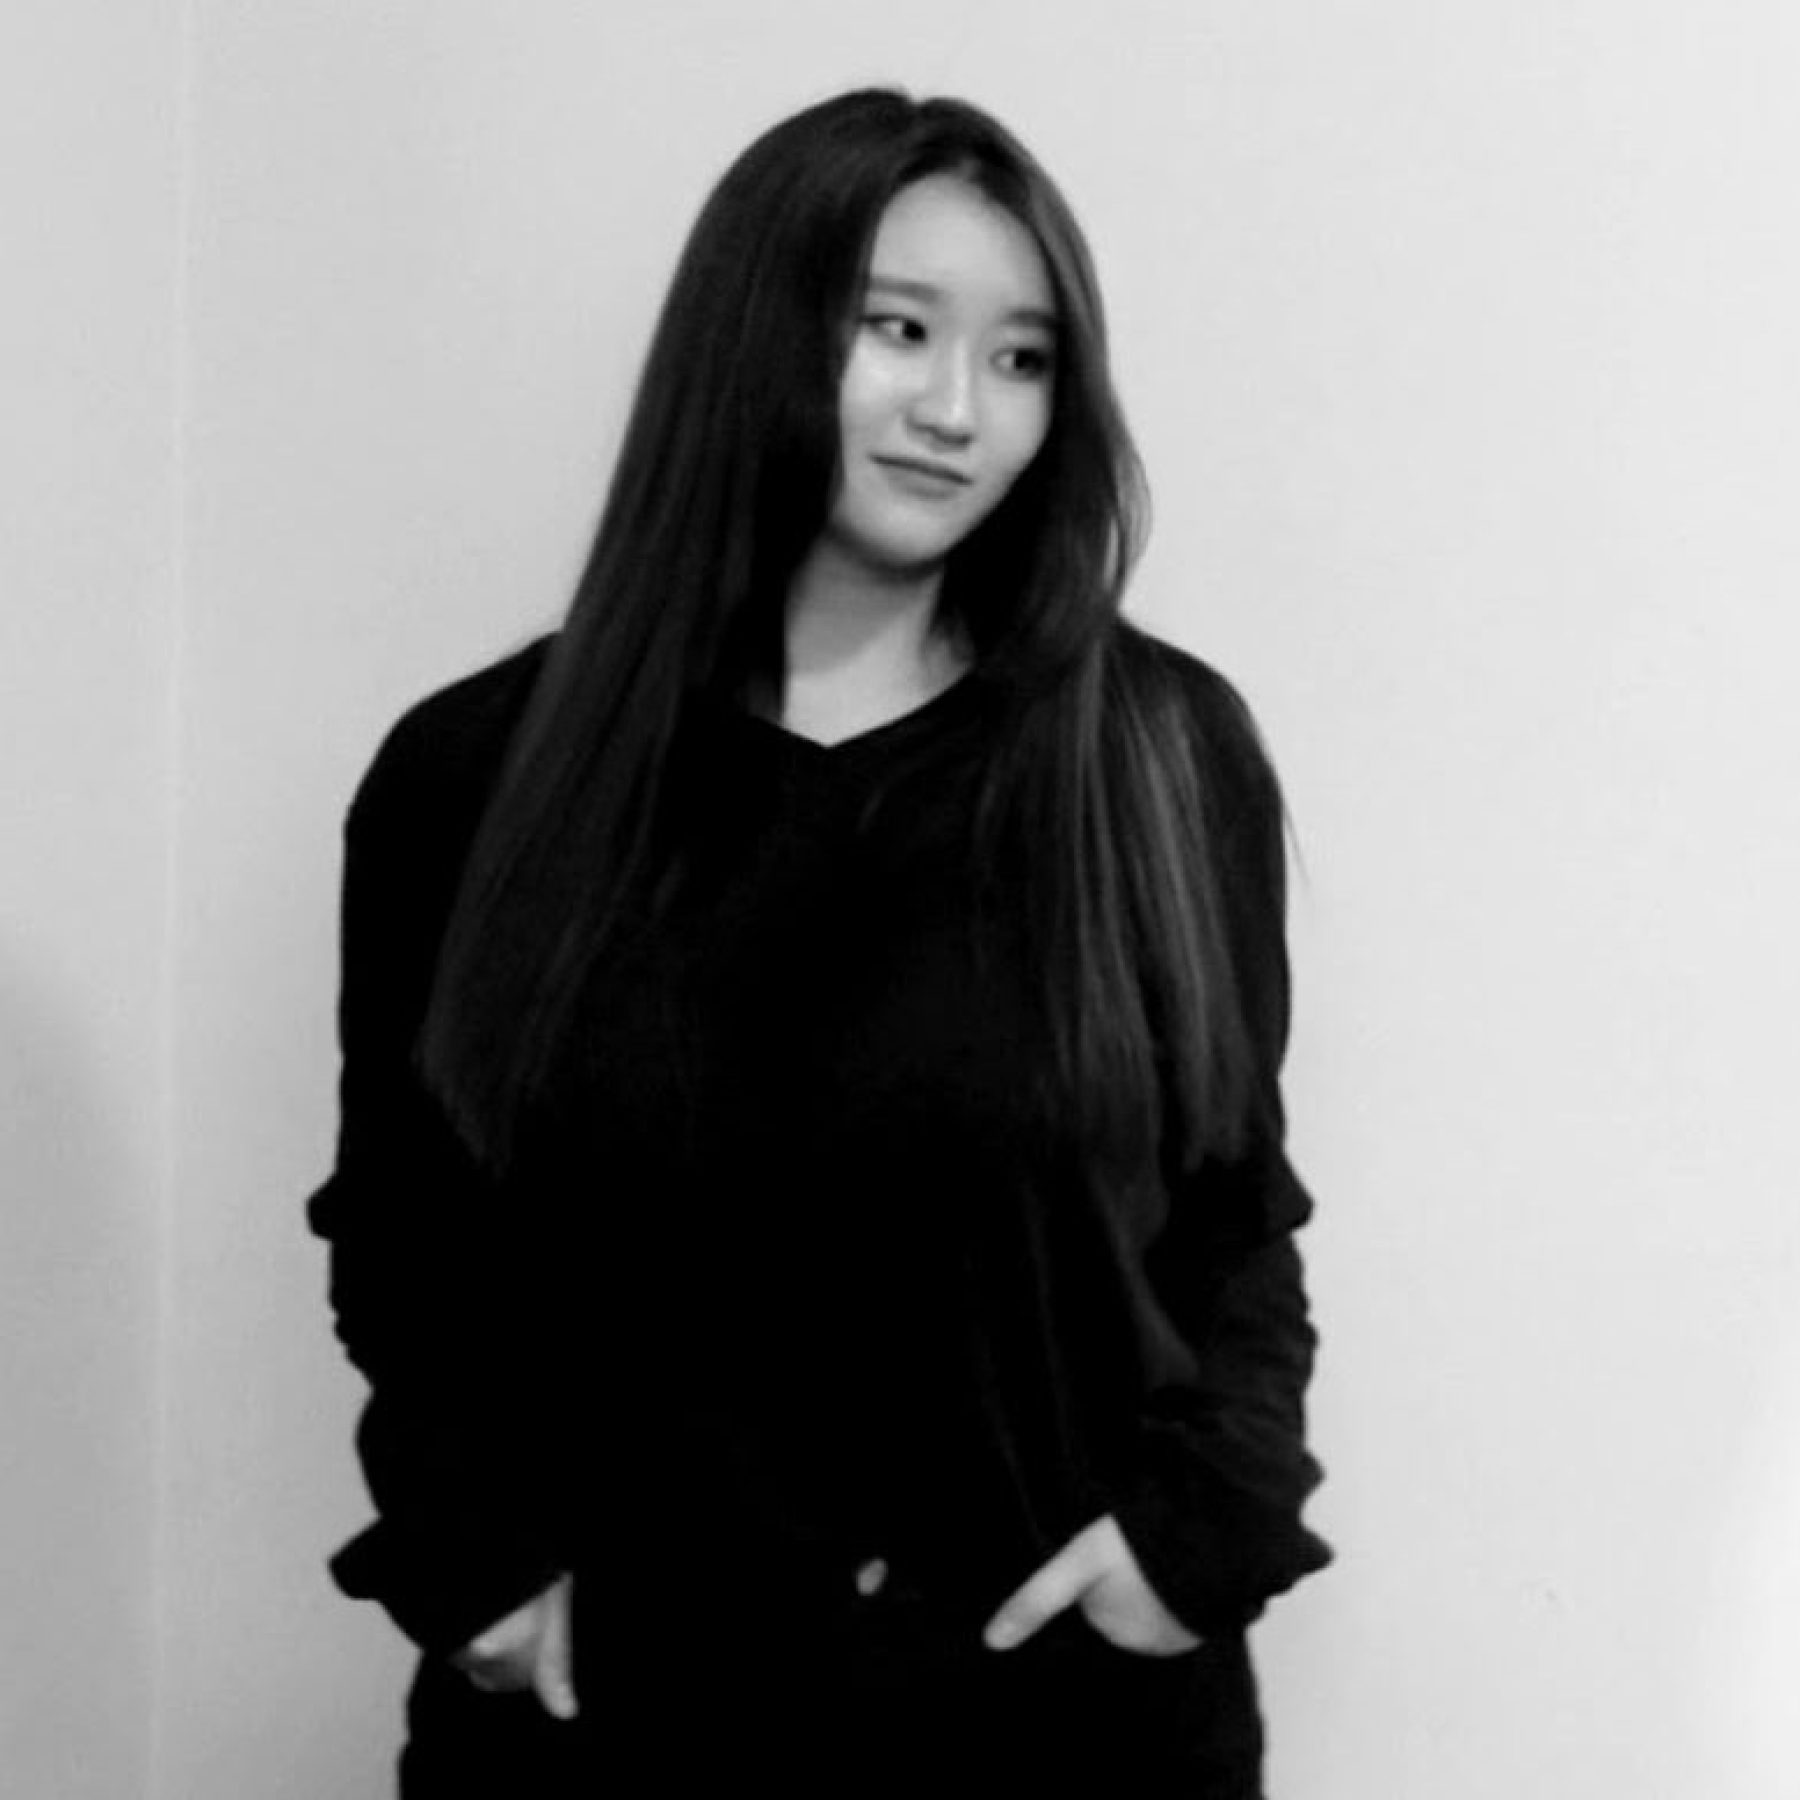 Black and white photo of Irene Chun with her hands in her pocket